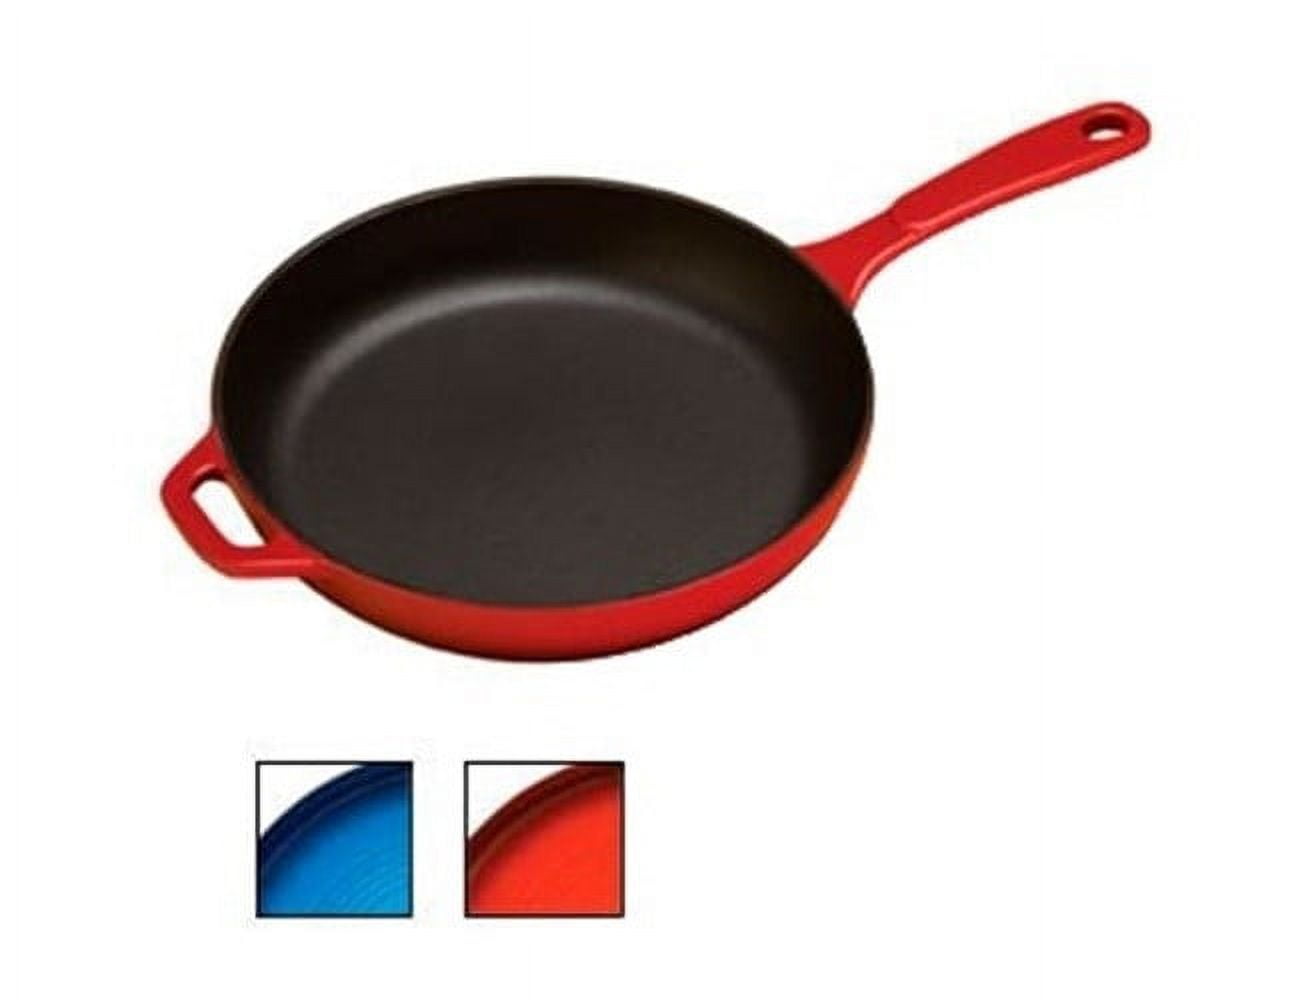 Get 3 Pc Enameled Cast Iron Skillet Set - Red Gracious Home Latest Fashion  with Stylish Designs and Top-Notch Quality